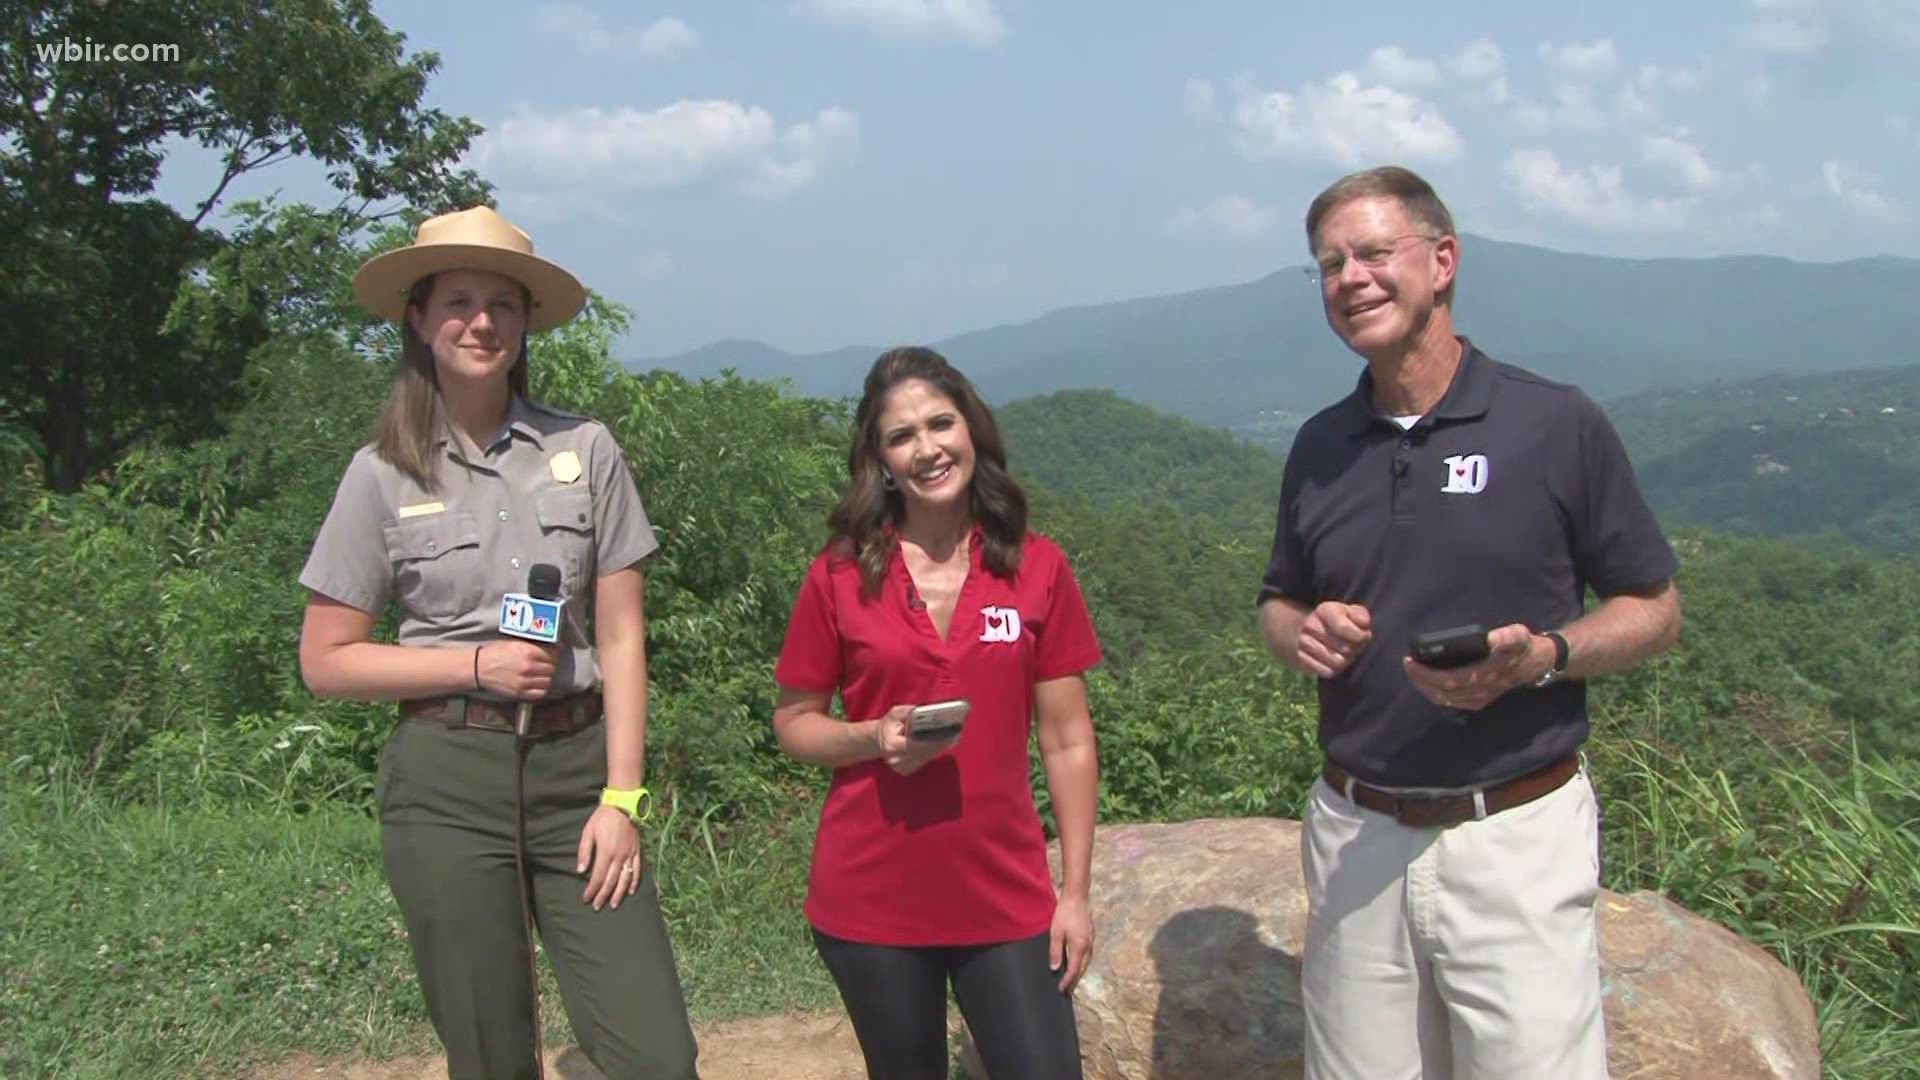 Ranger Caitlin Worth tells us about some popular destinations in the national park.